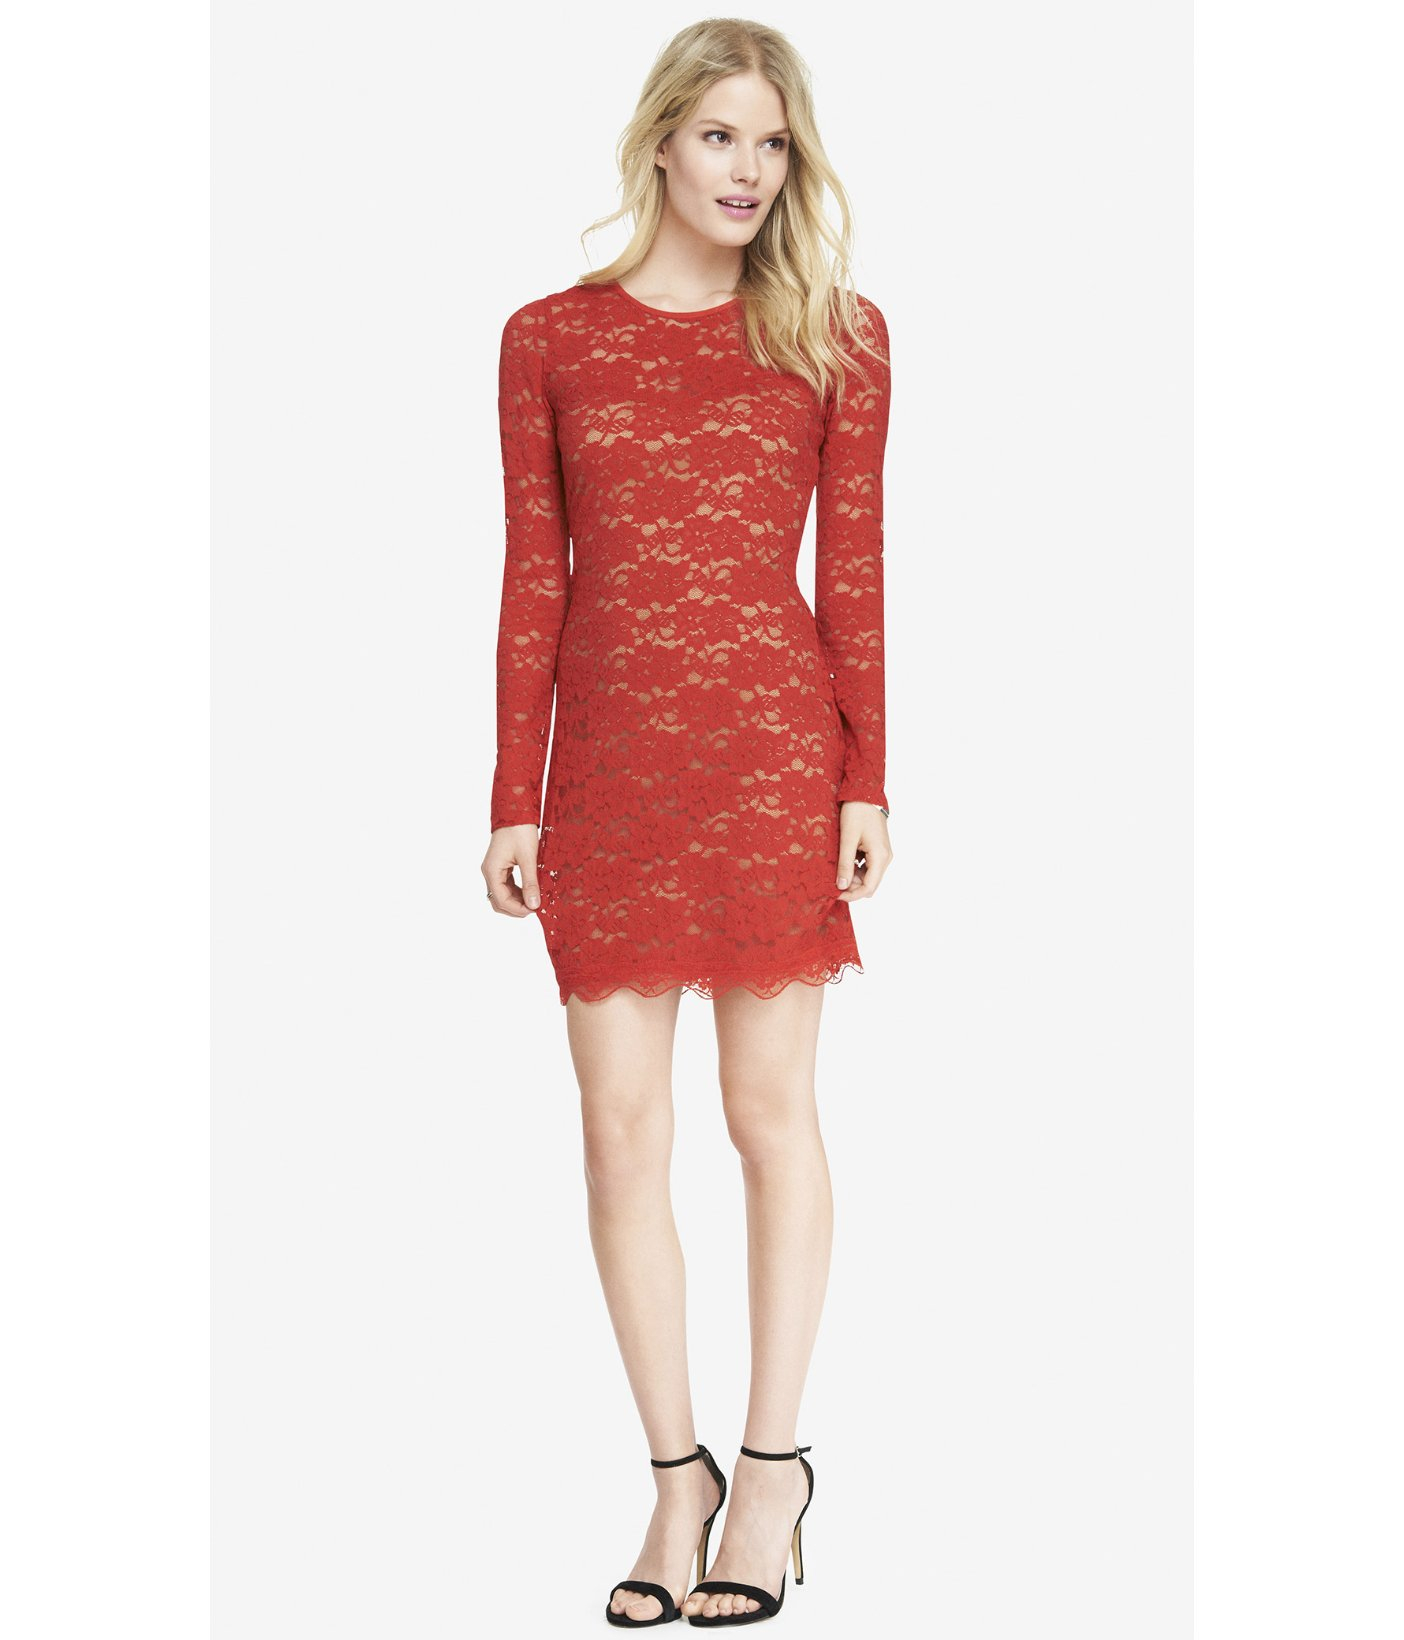 Red sheath dresses for women at express stores